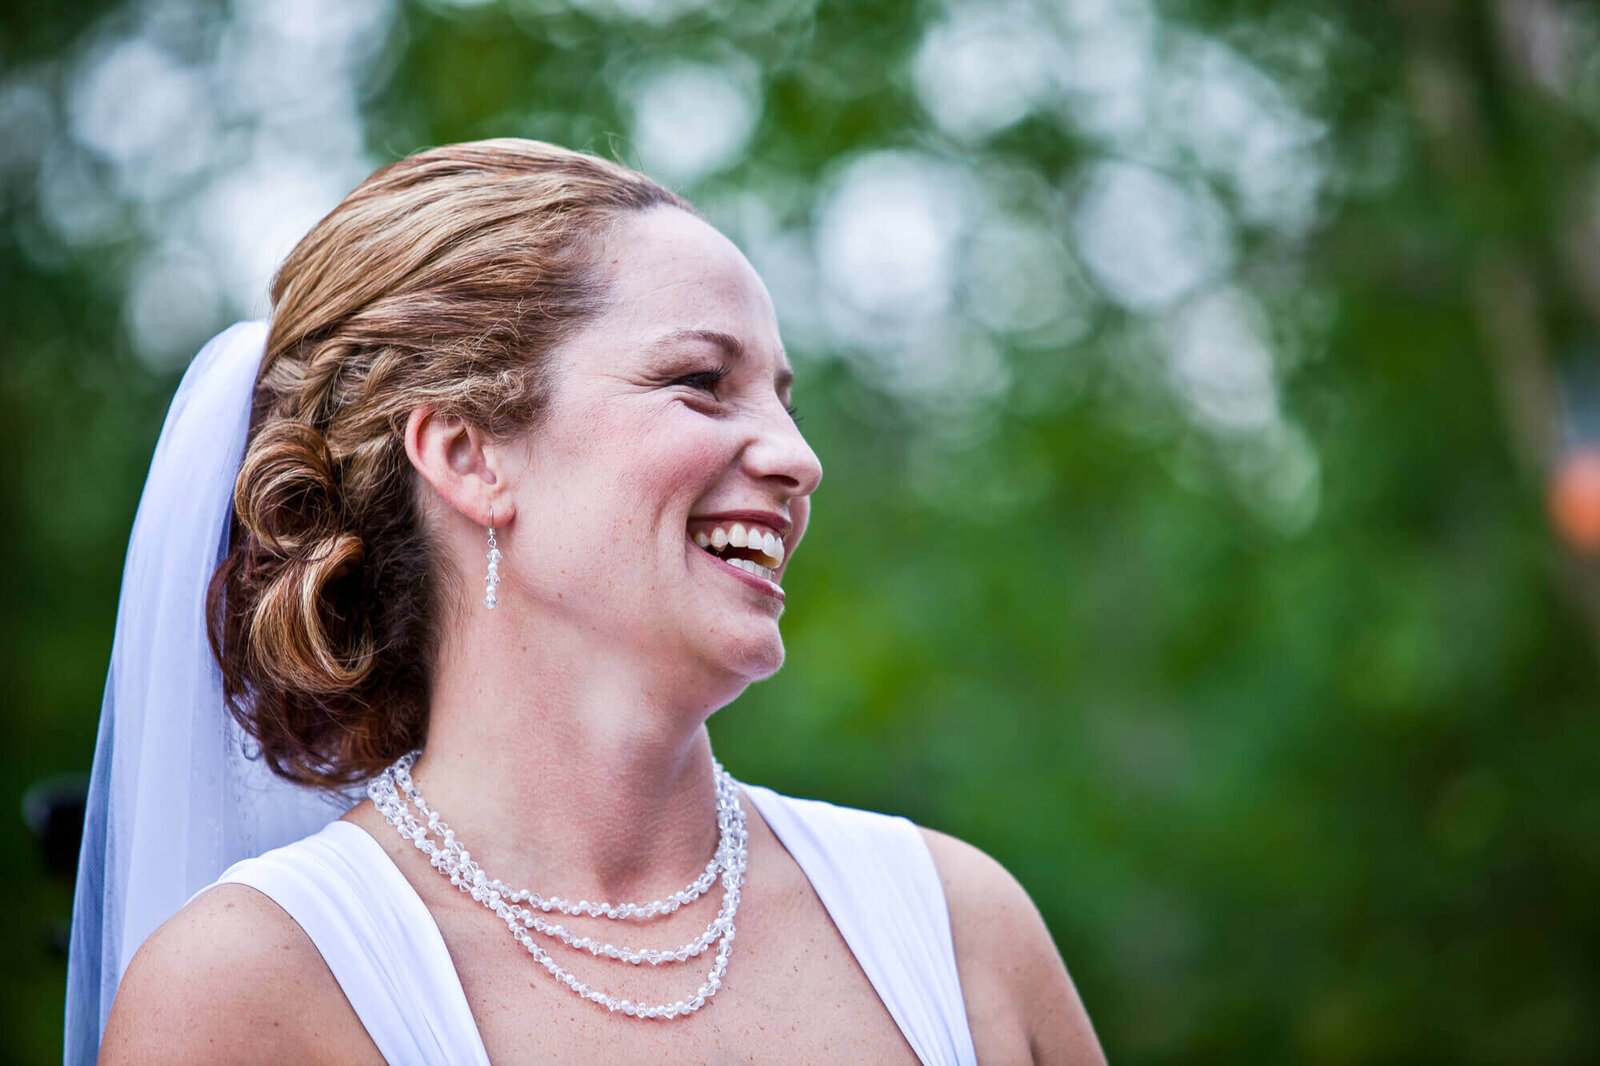 gorgeous bride laughing as groom  reminds her of a funny story